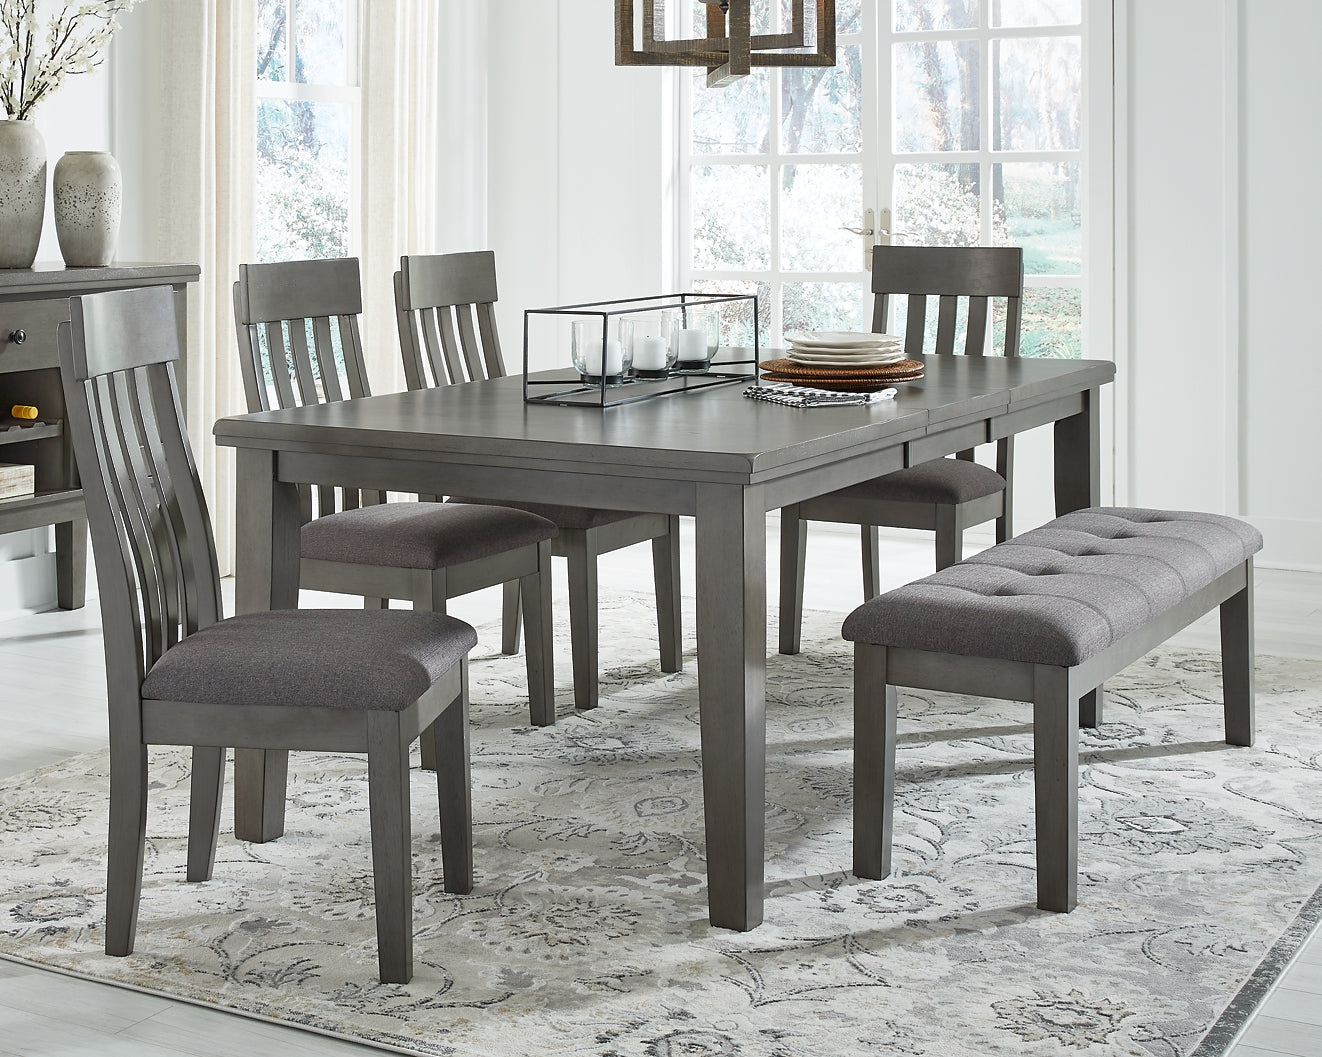 Hallanden Dining Table and 4 Chairs and Bench JB's Furniture  Home Furniture, Home Decor, Furniture Store